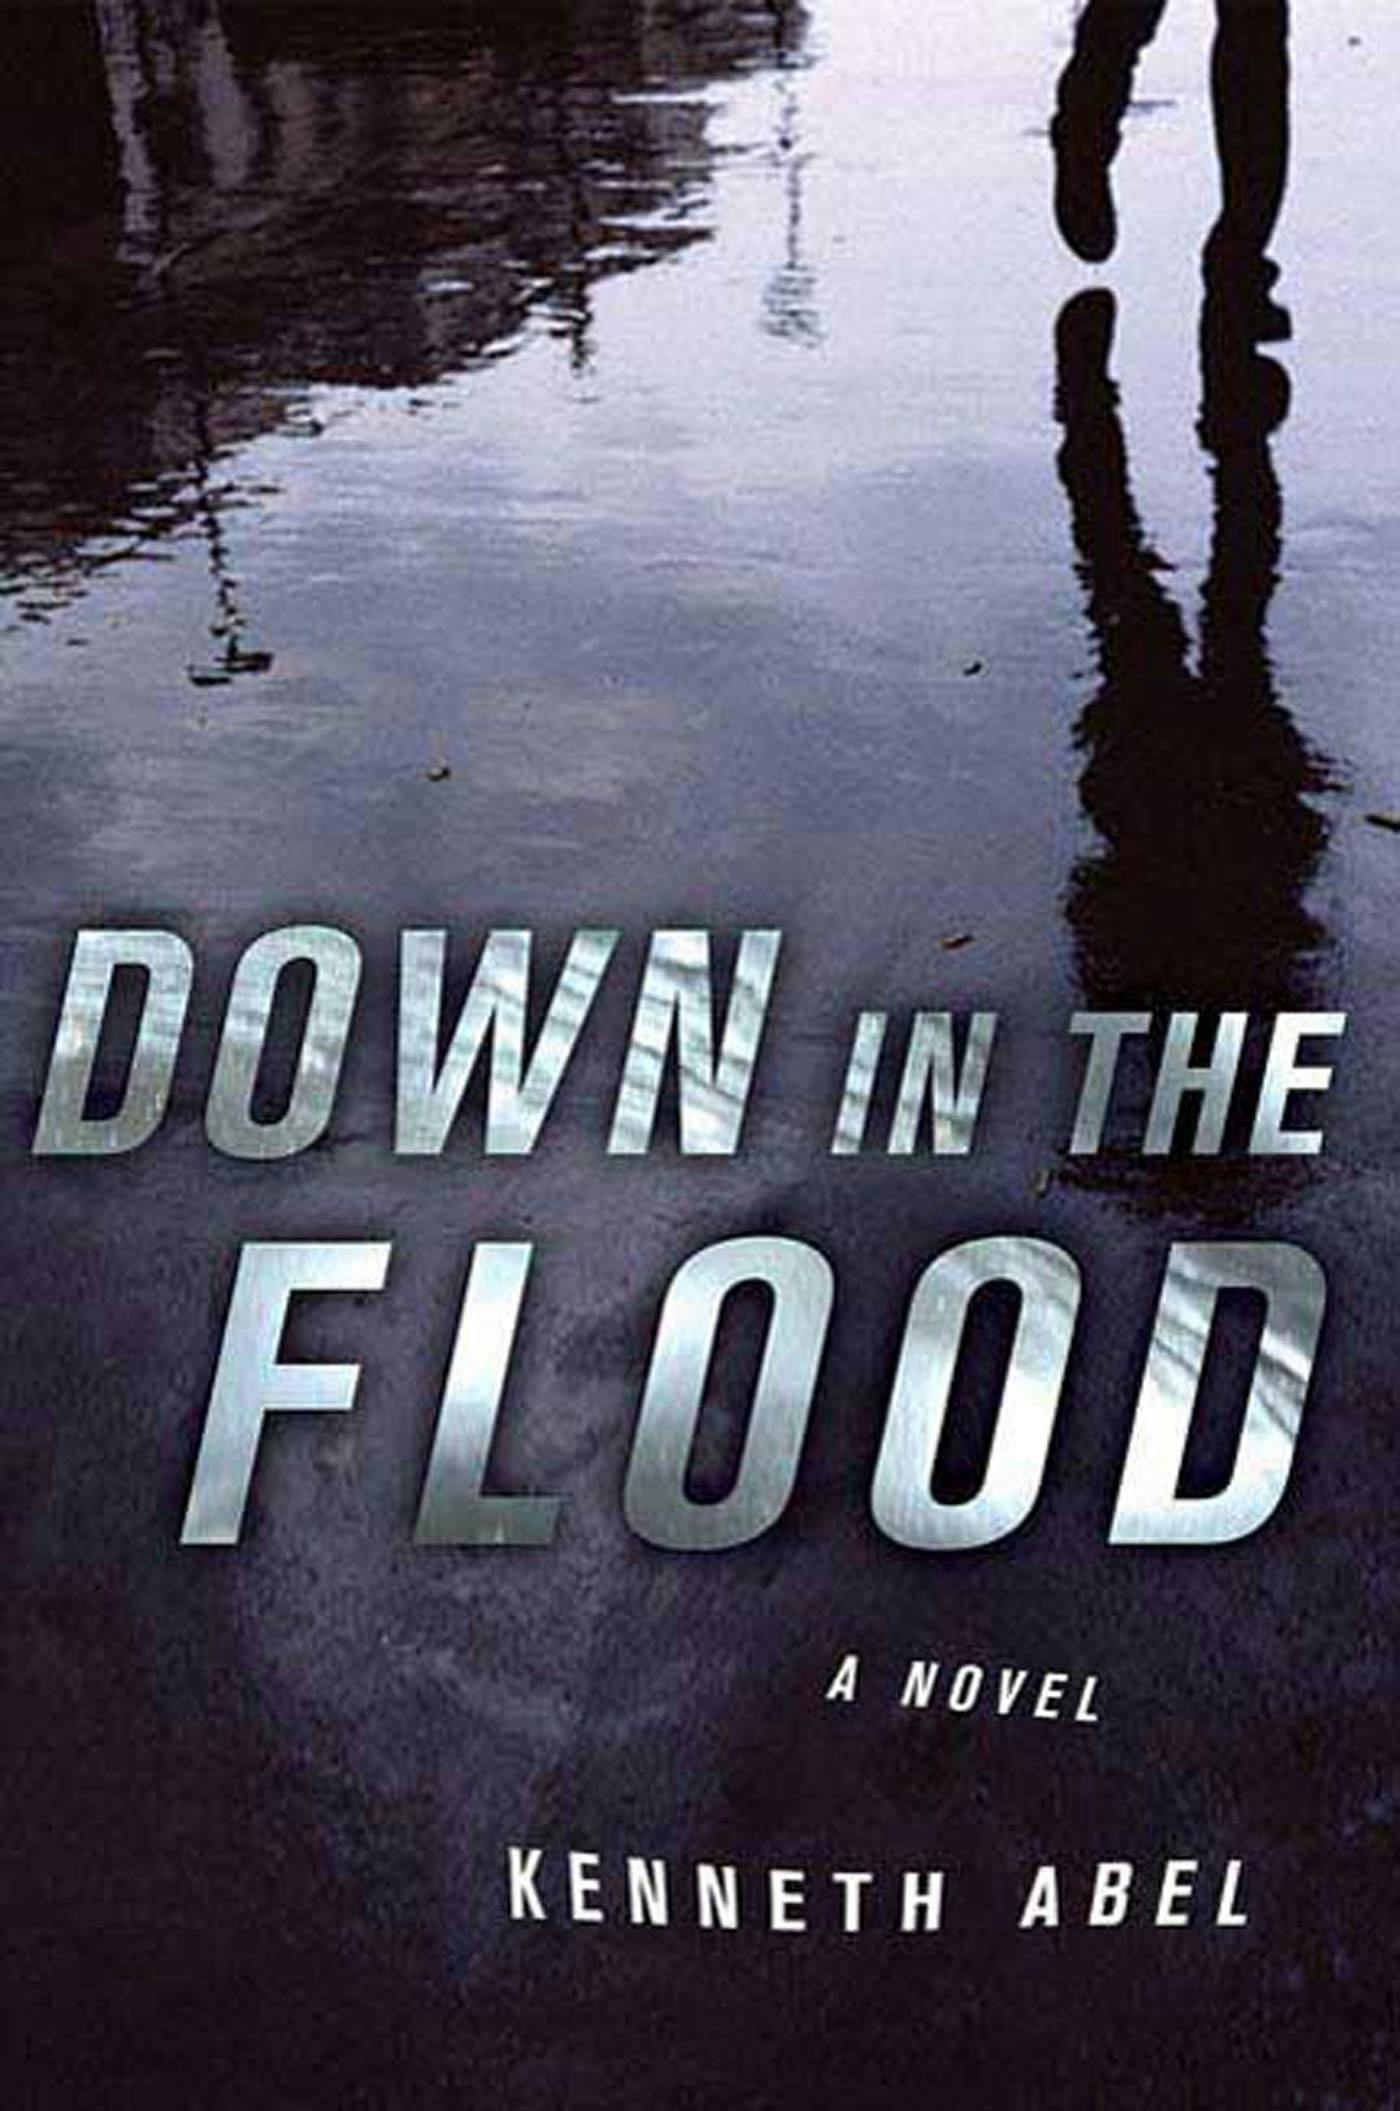 Down in the Flood